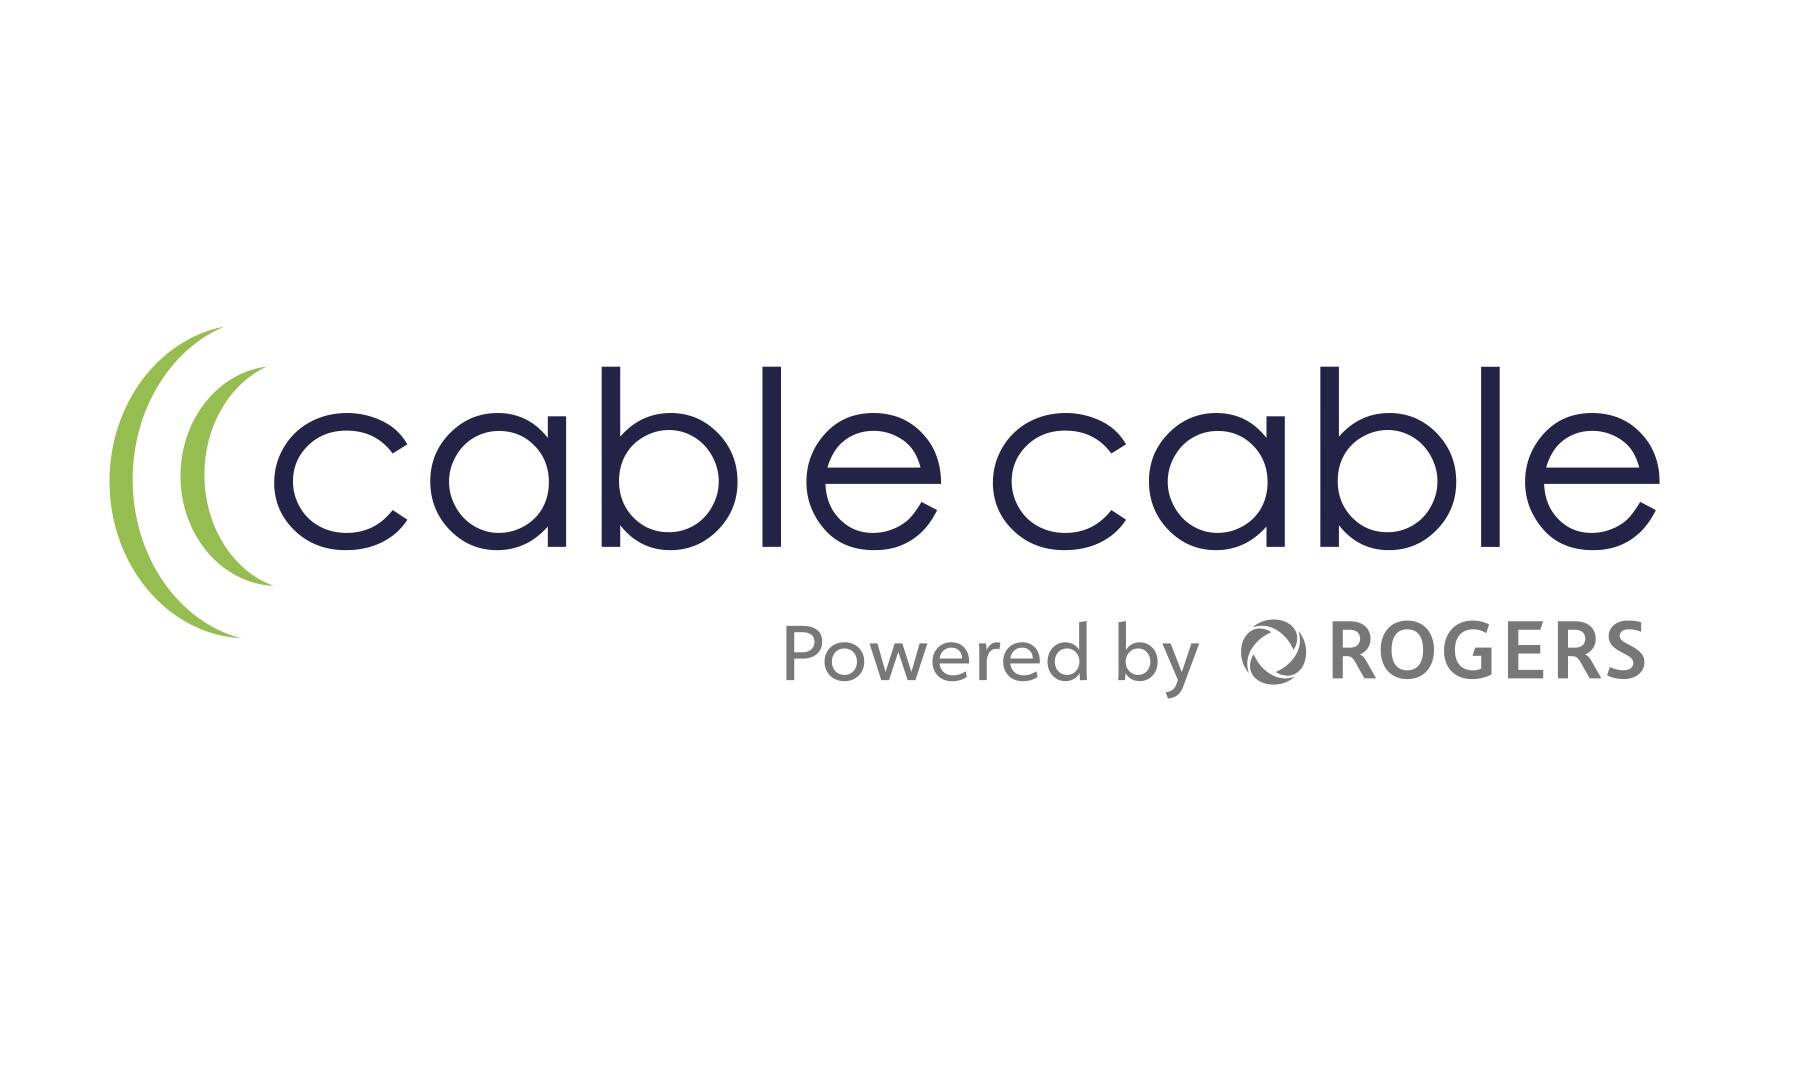 Cable Cable